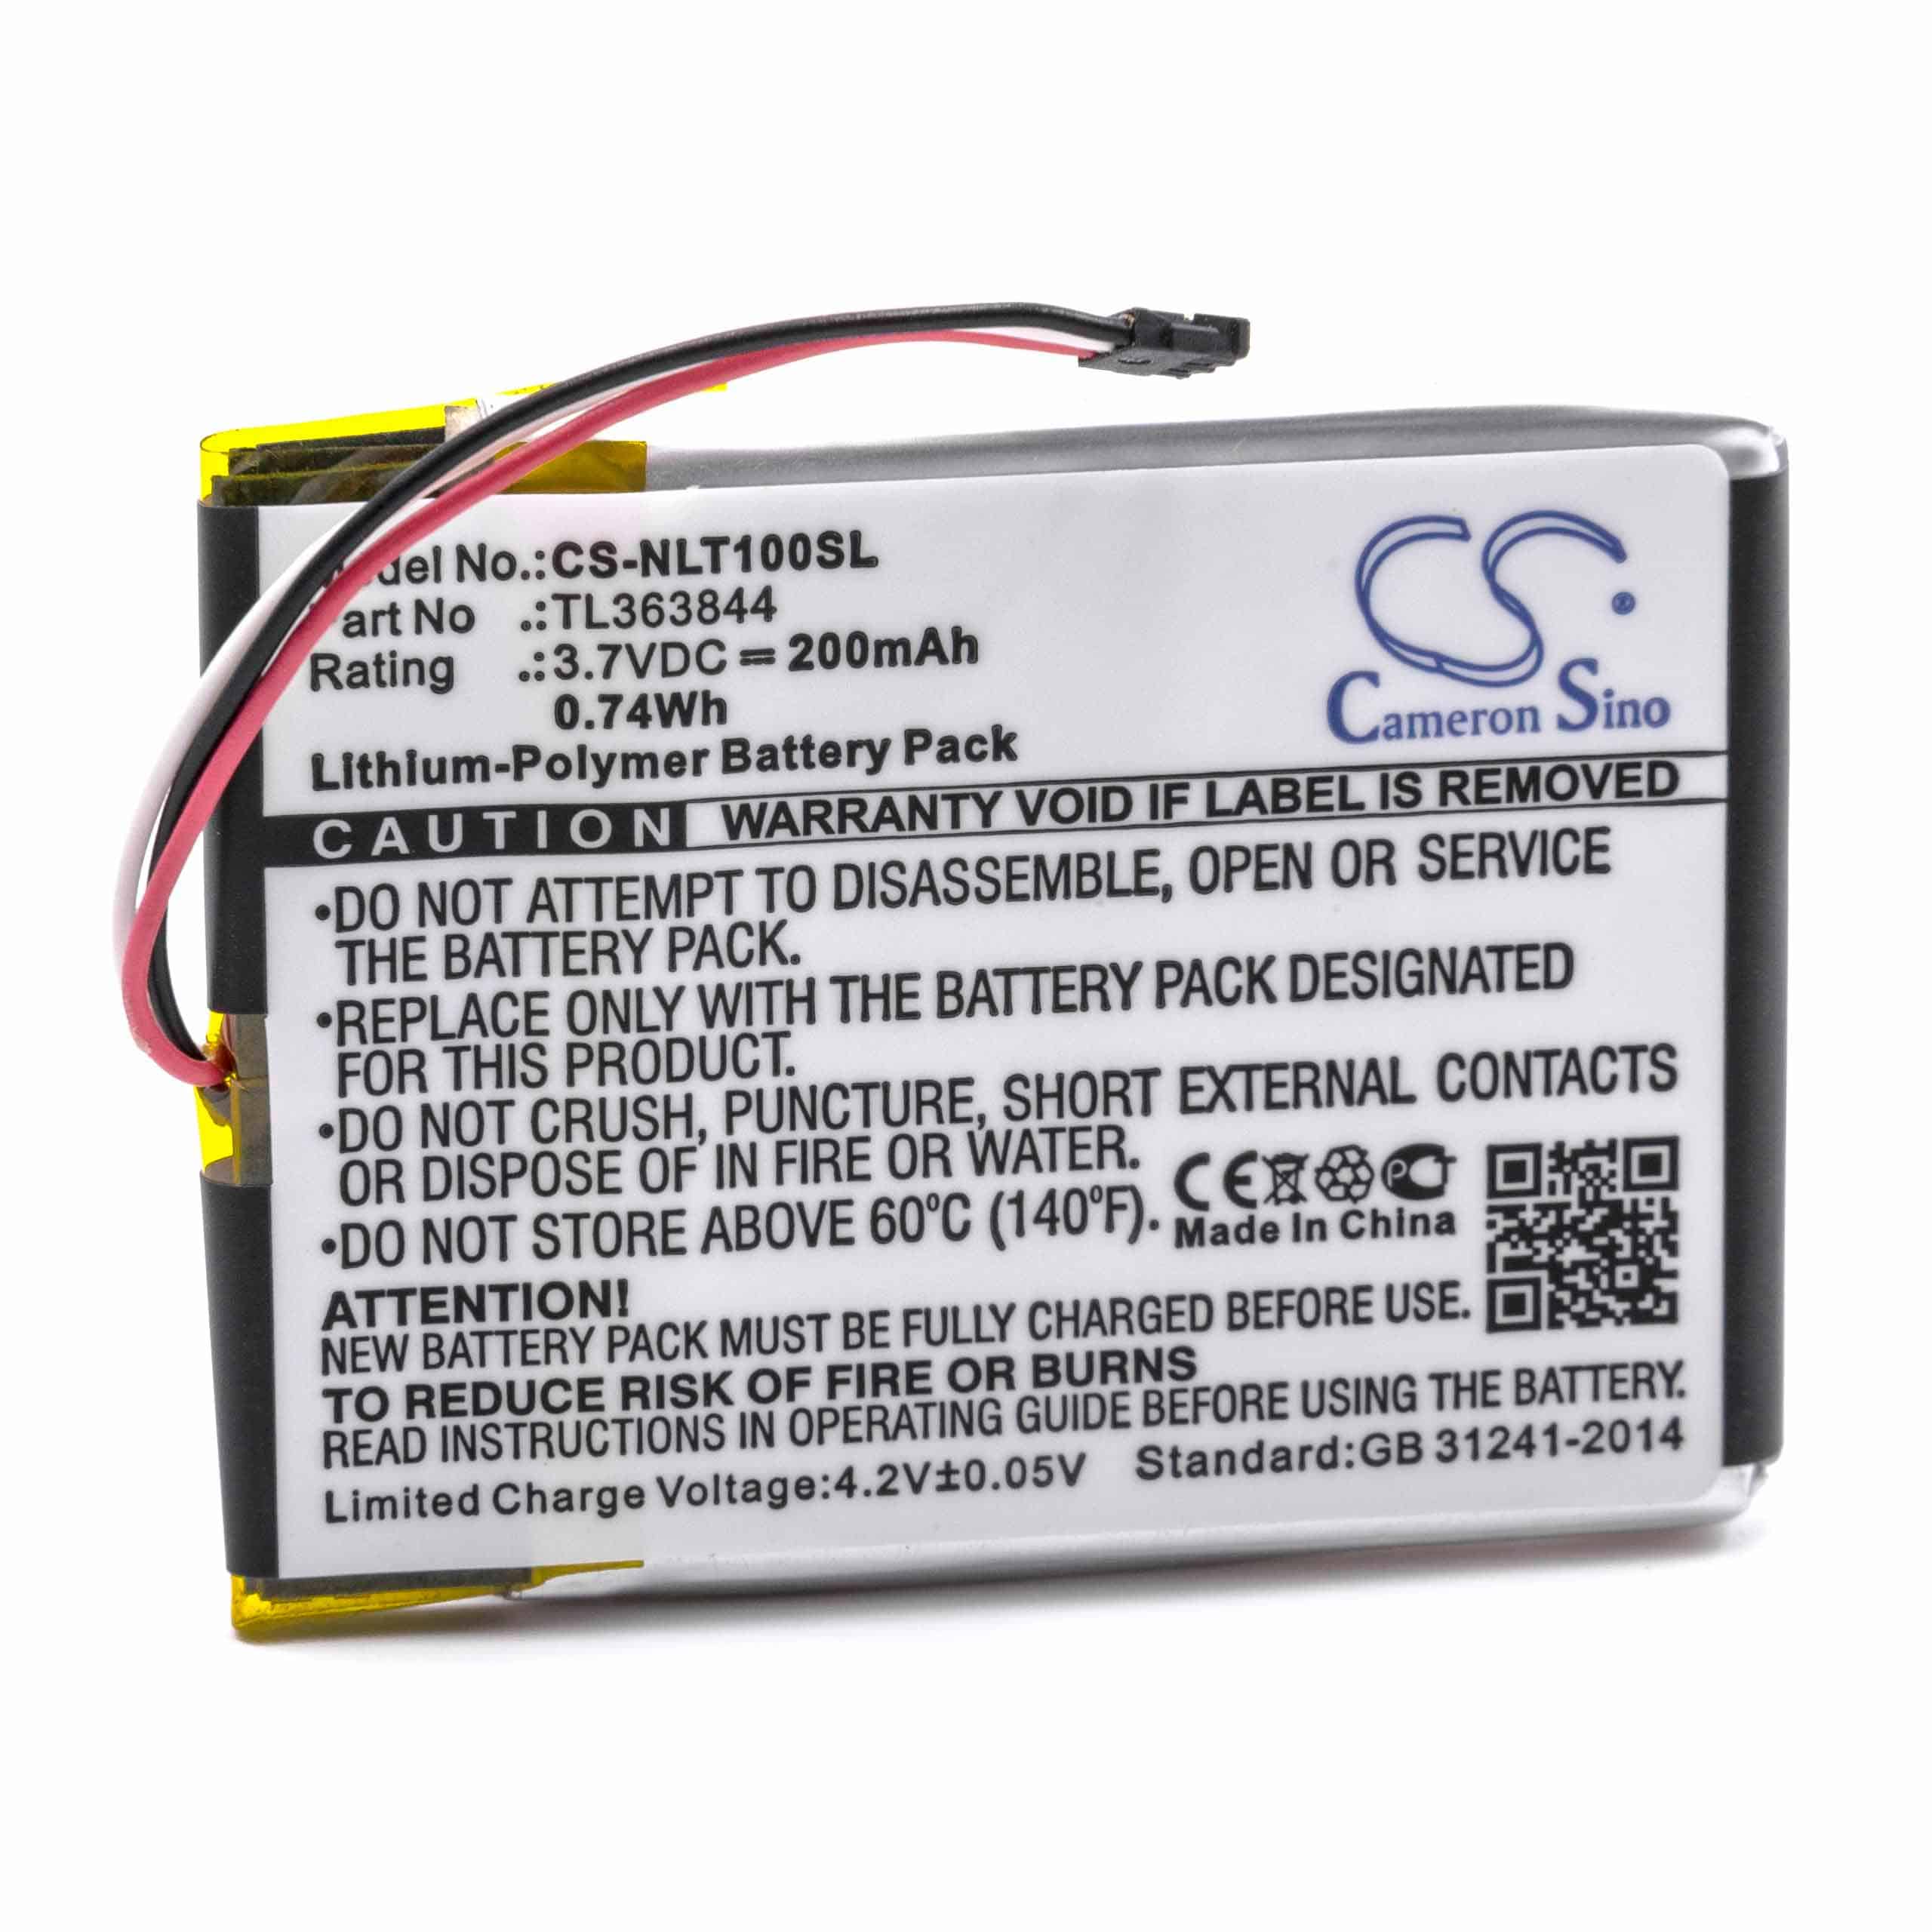 Thermostat Battery Replacement for Nest TL363844 - 200mAh 3.7V Li-polymer